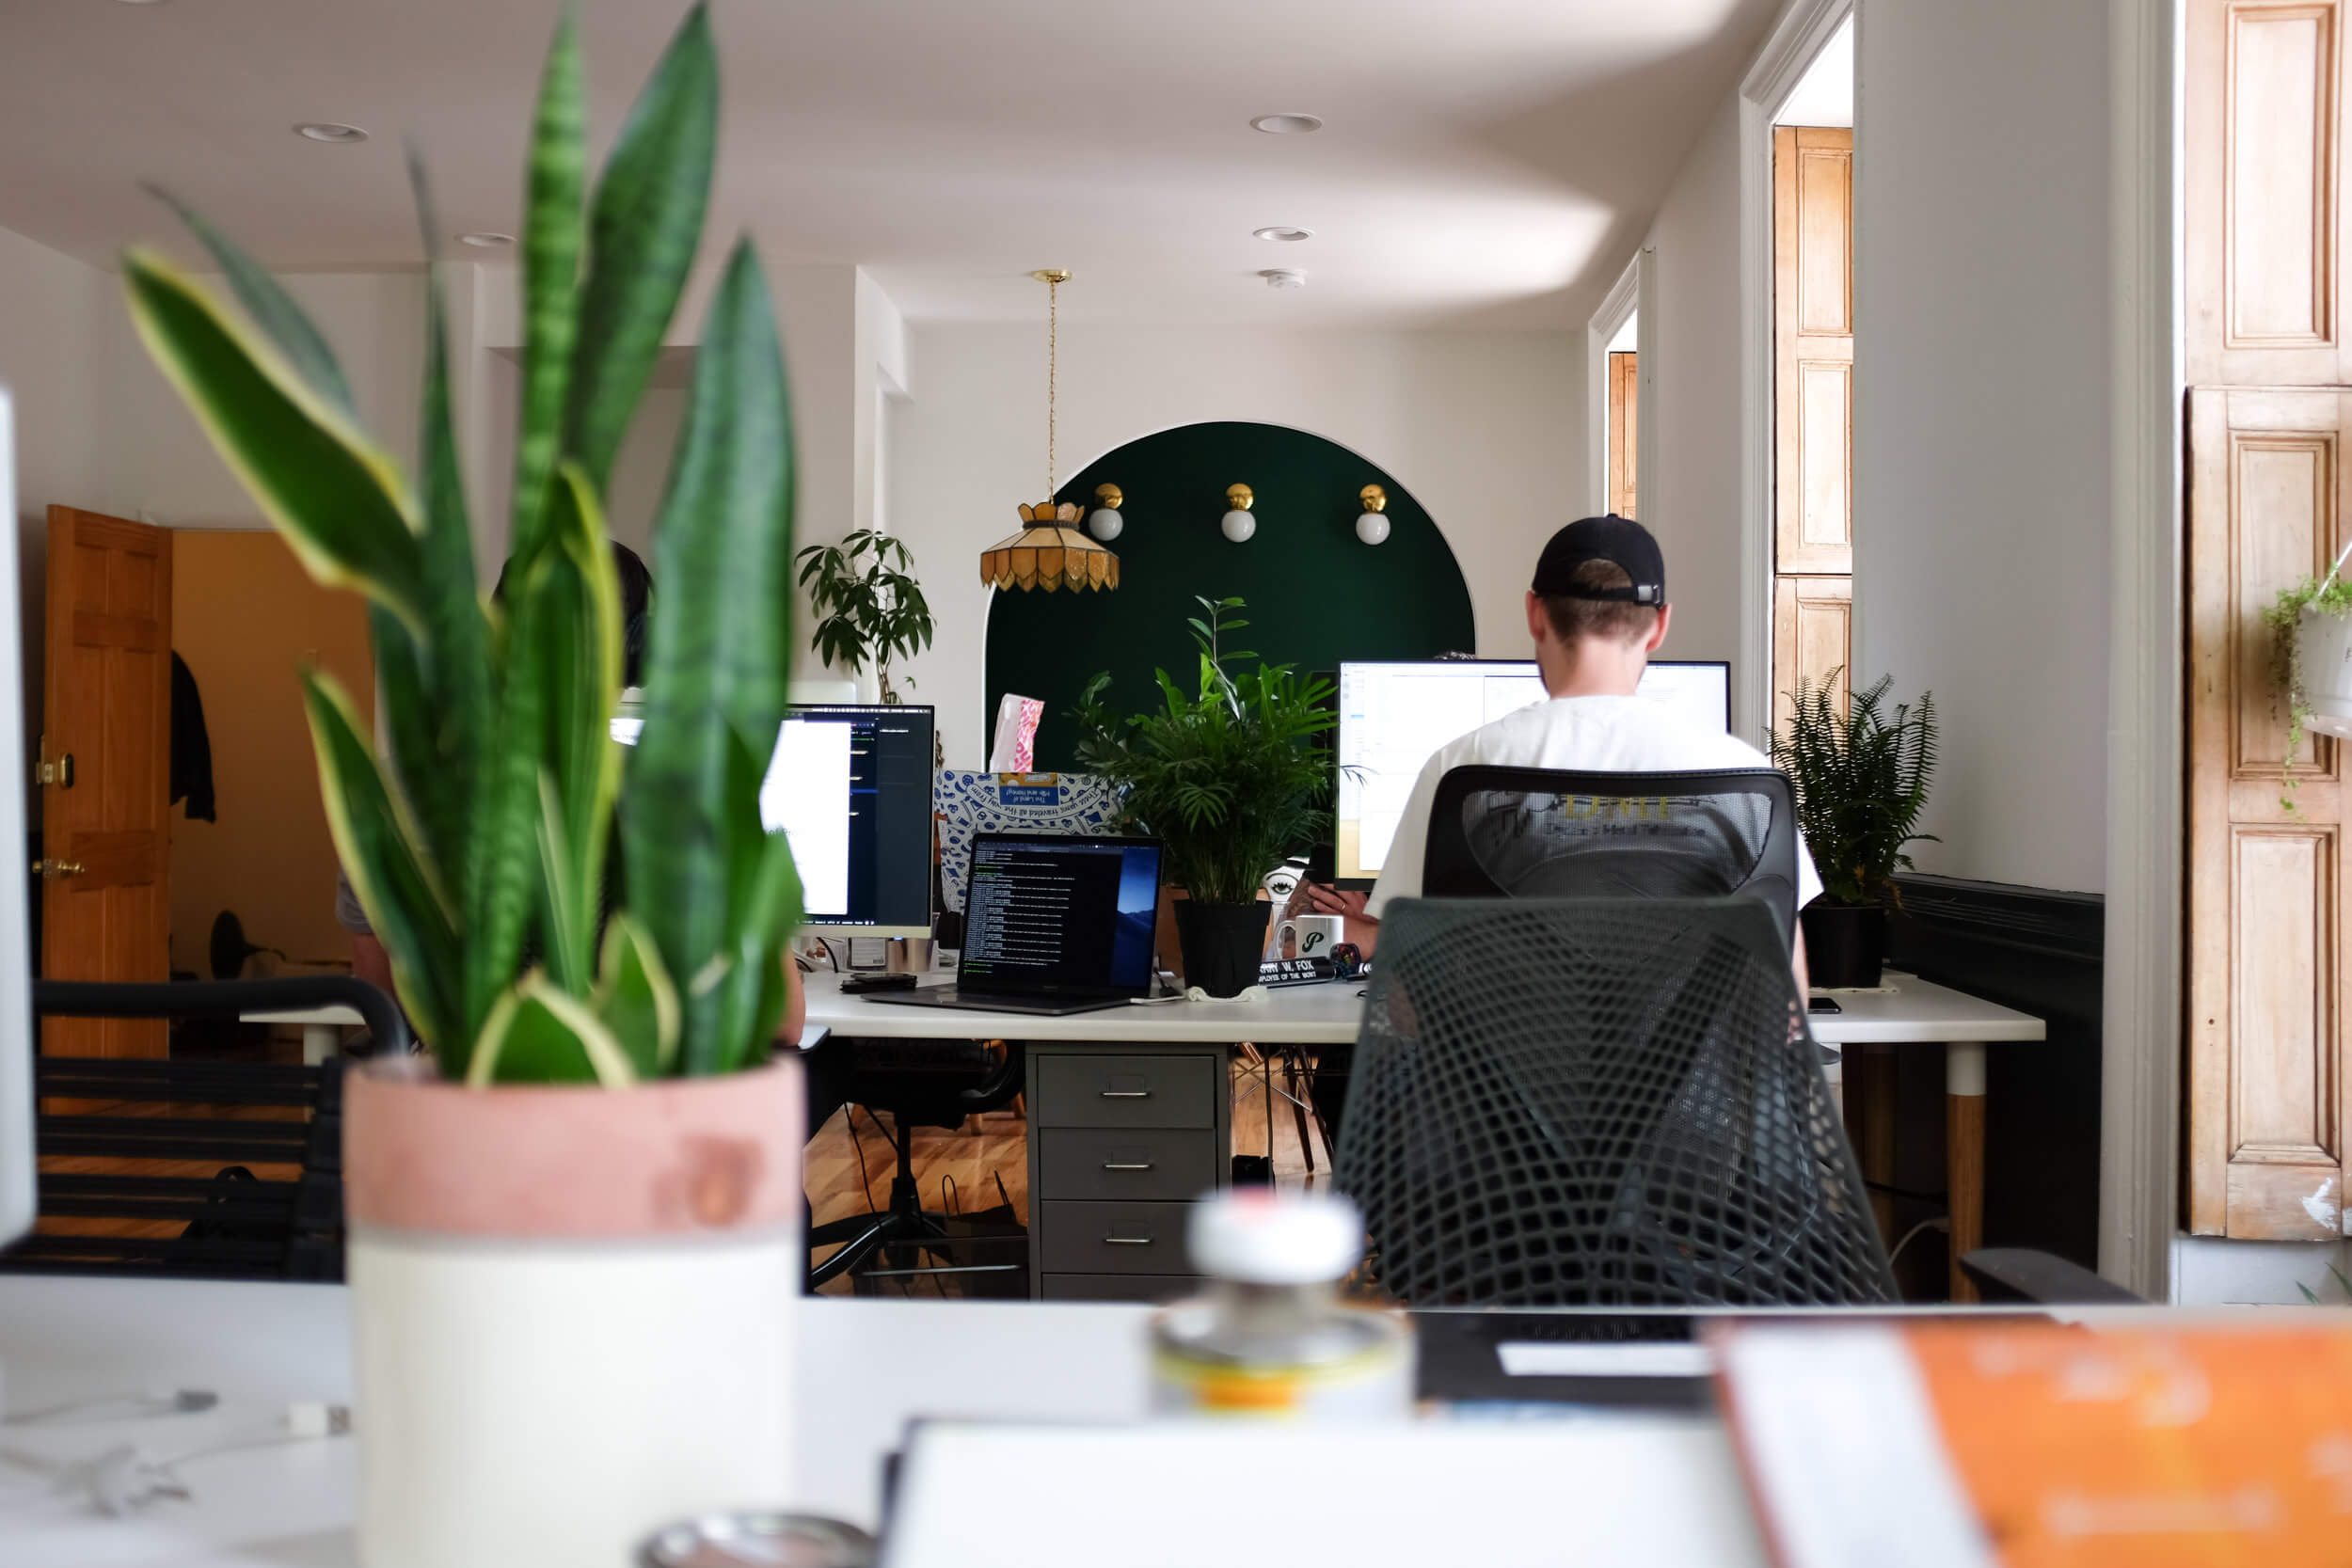 A hip programmer working at a desk with a snake plant in the foreground and an archway in the background